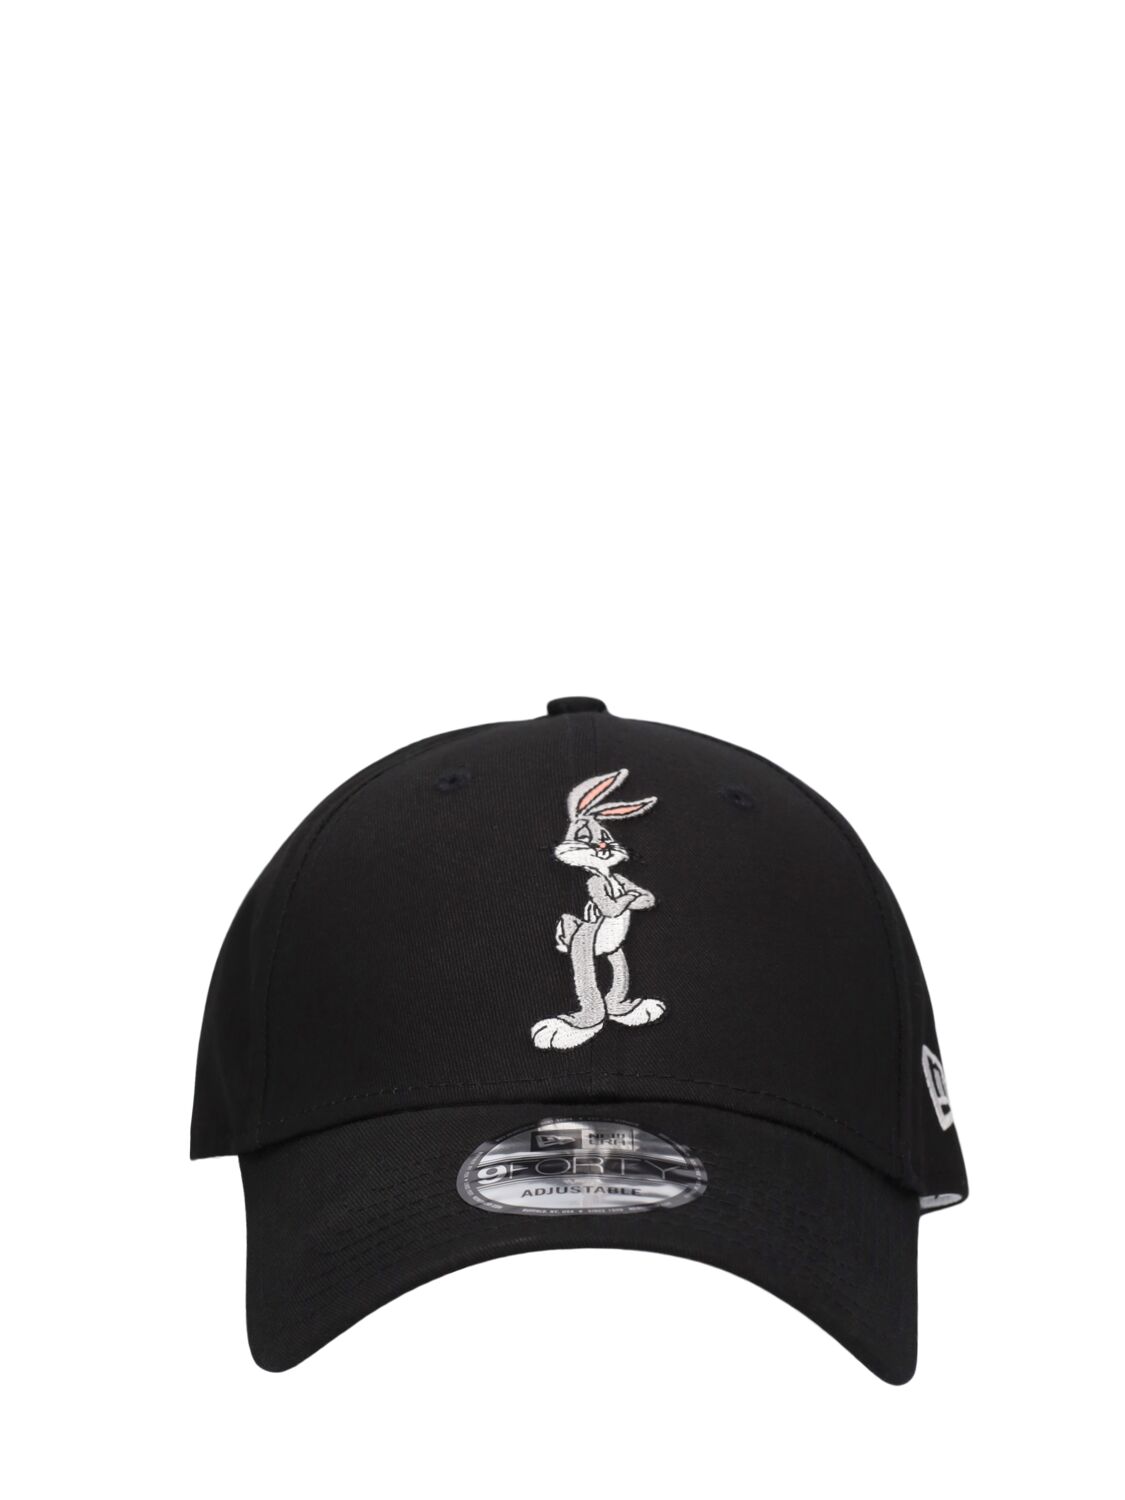 Image of Bugs Bunny Looney Tunes 9forty Cap